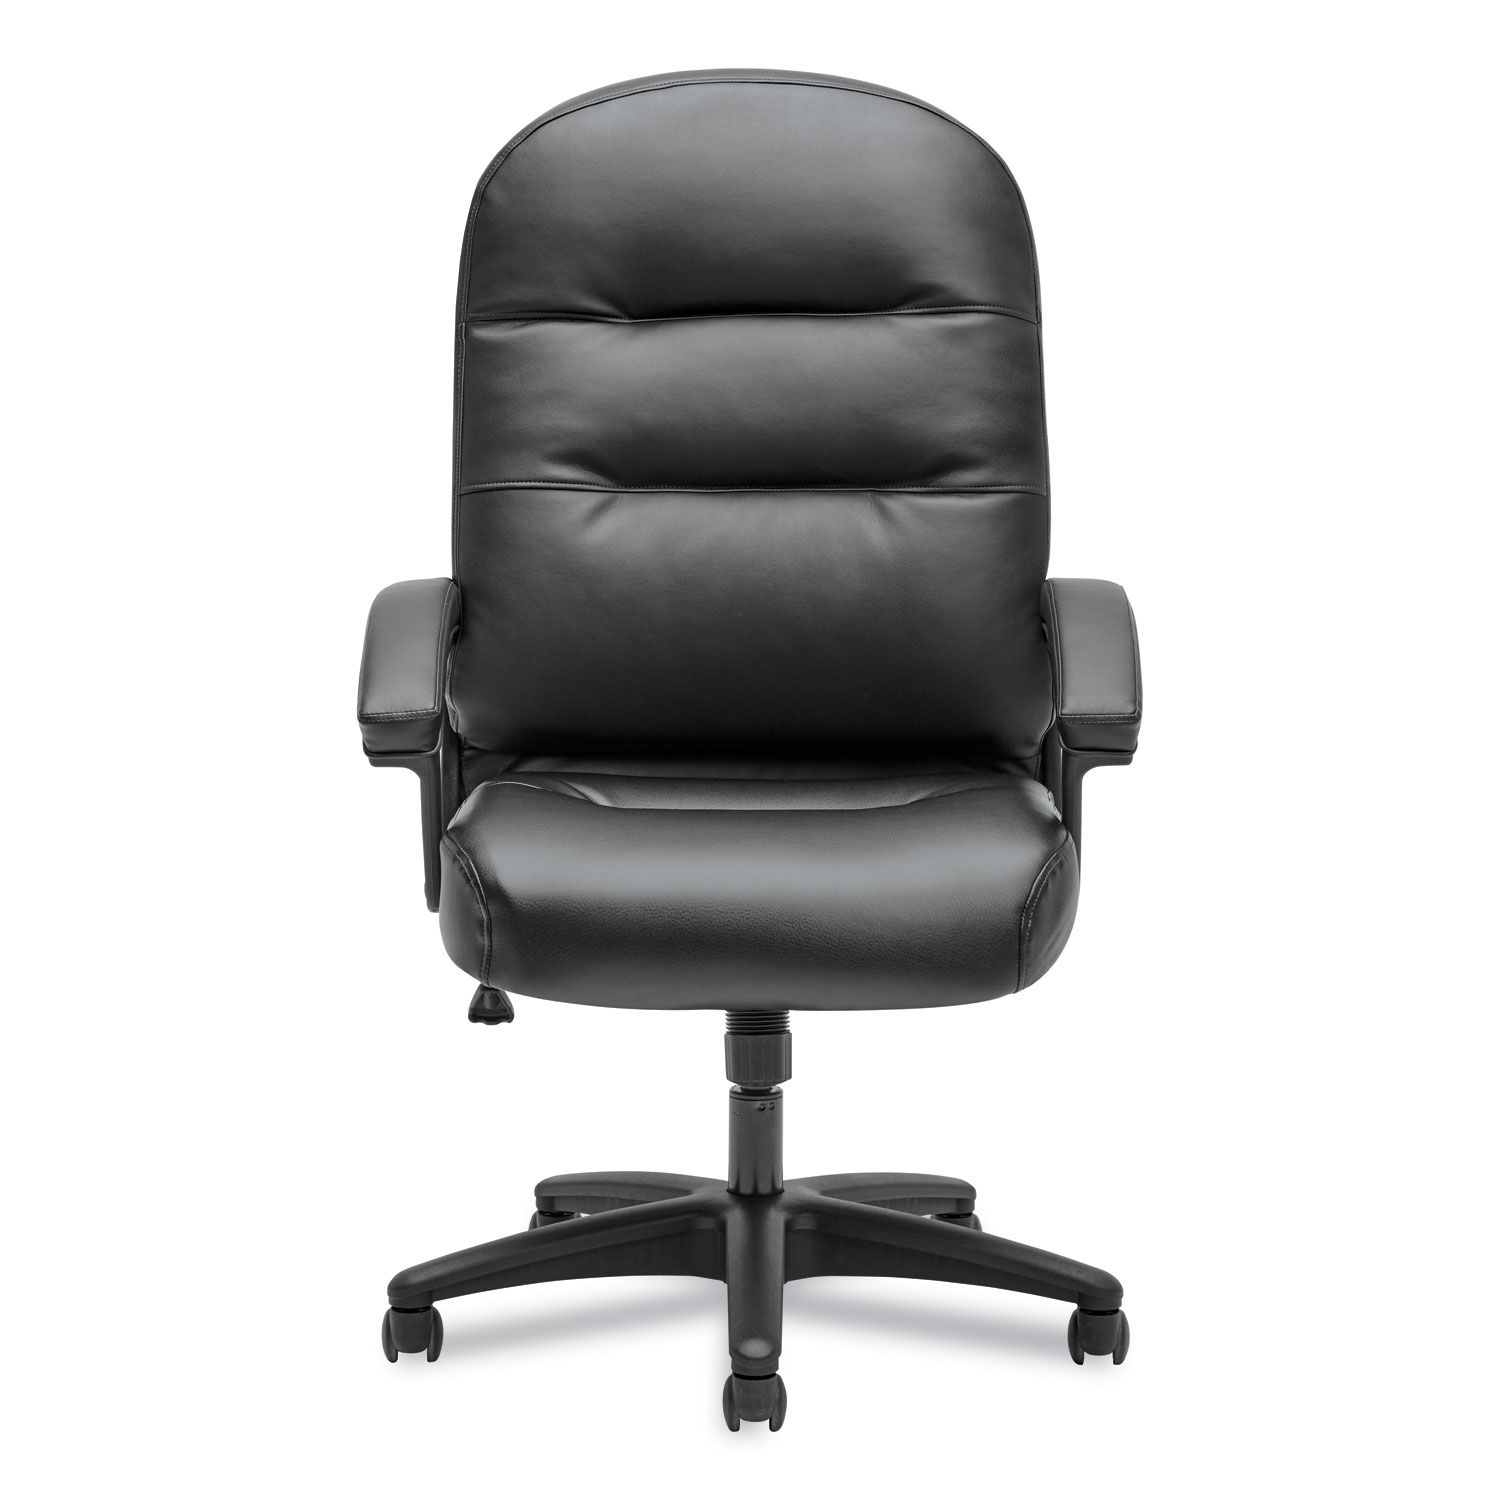 Pillow-Soft 2090 Series Executive High-Back Swivel/Tilt Chair Supports Up to 250 lb, 16" to 21" Seat Height, Black